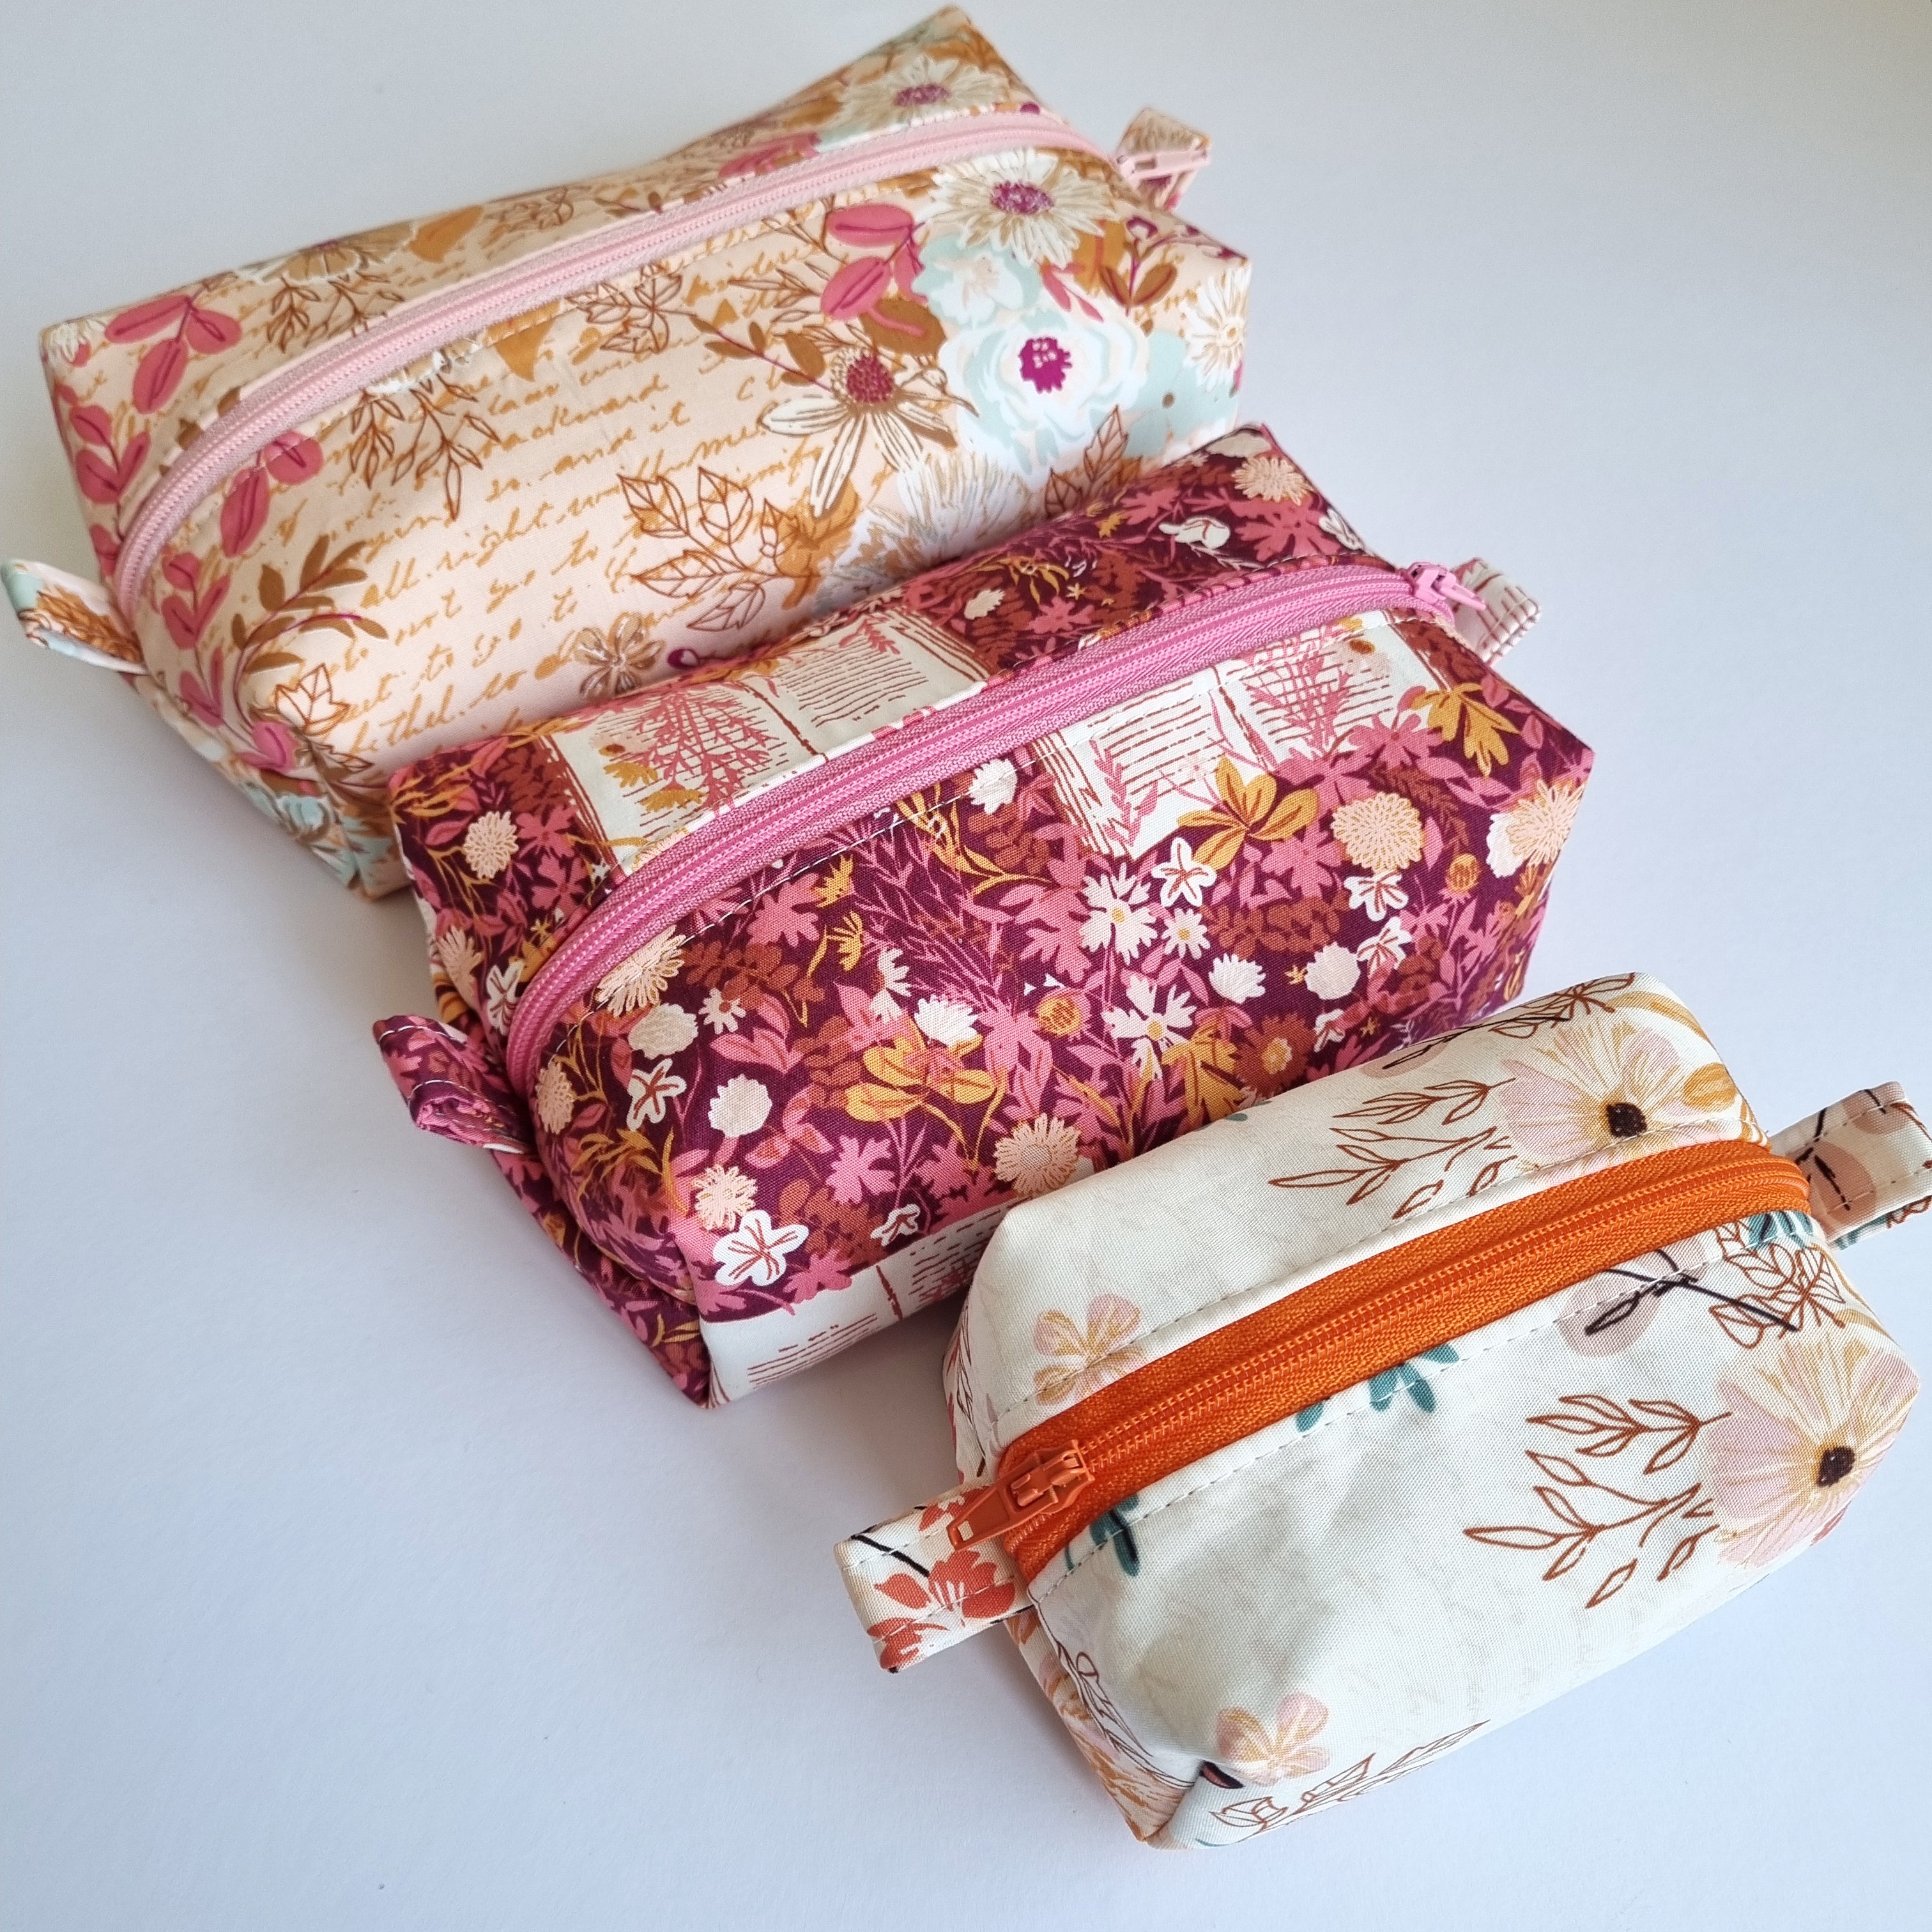 So Sew Easy Easy Cosmetics Bag pattern review by Katrina B